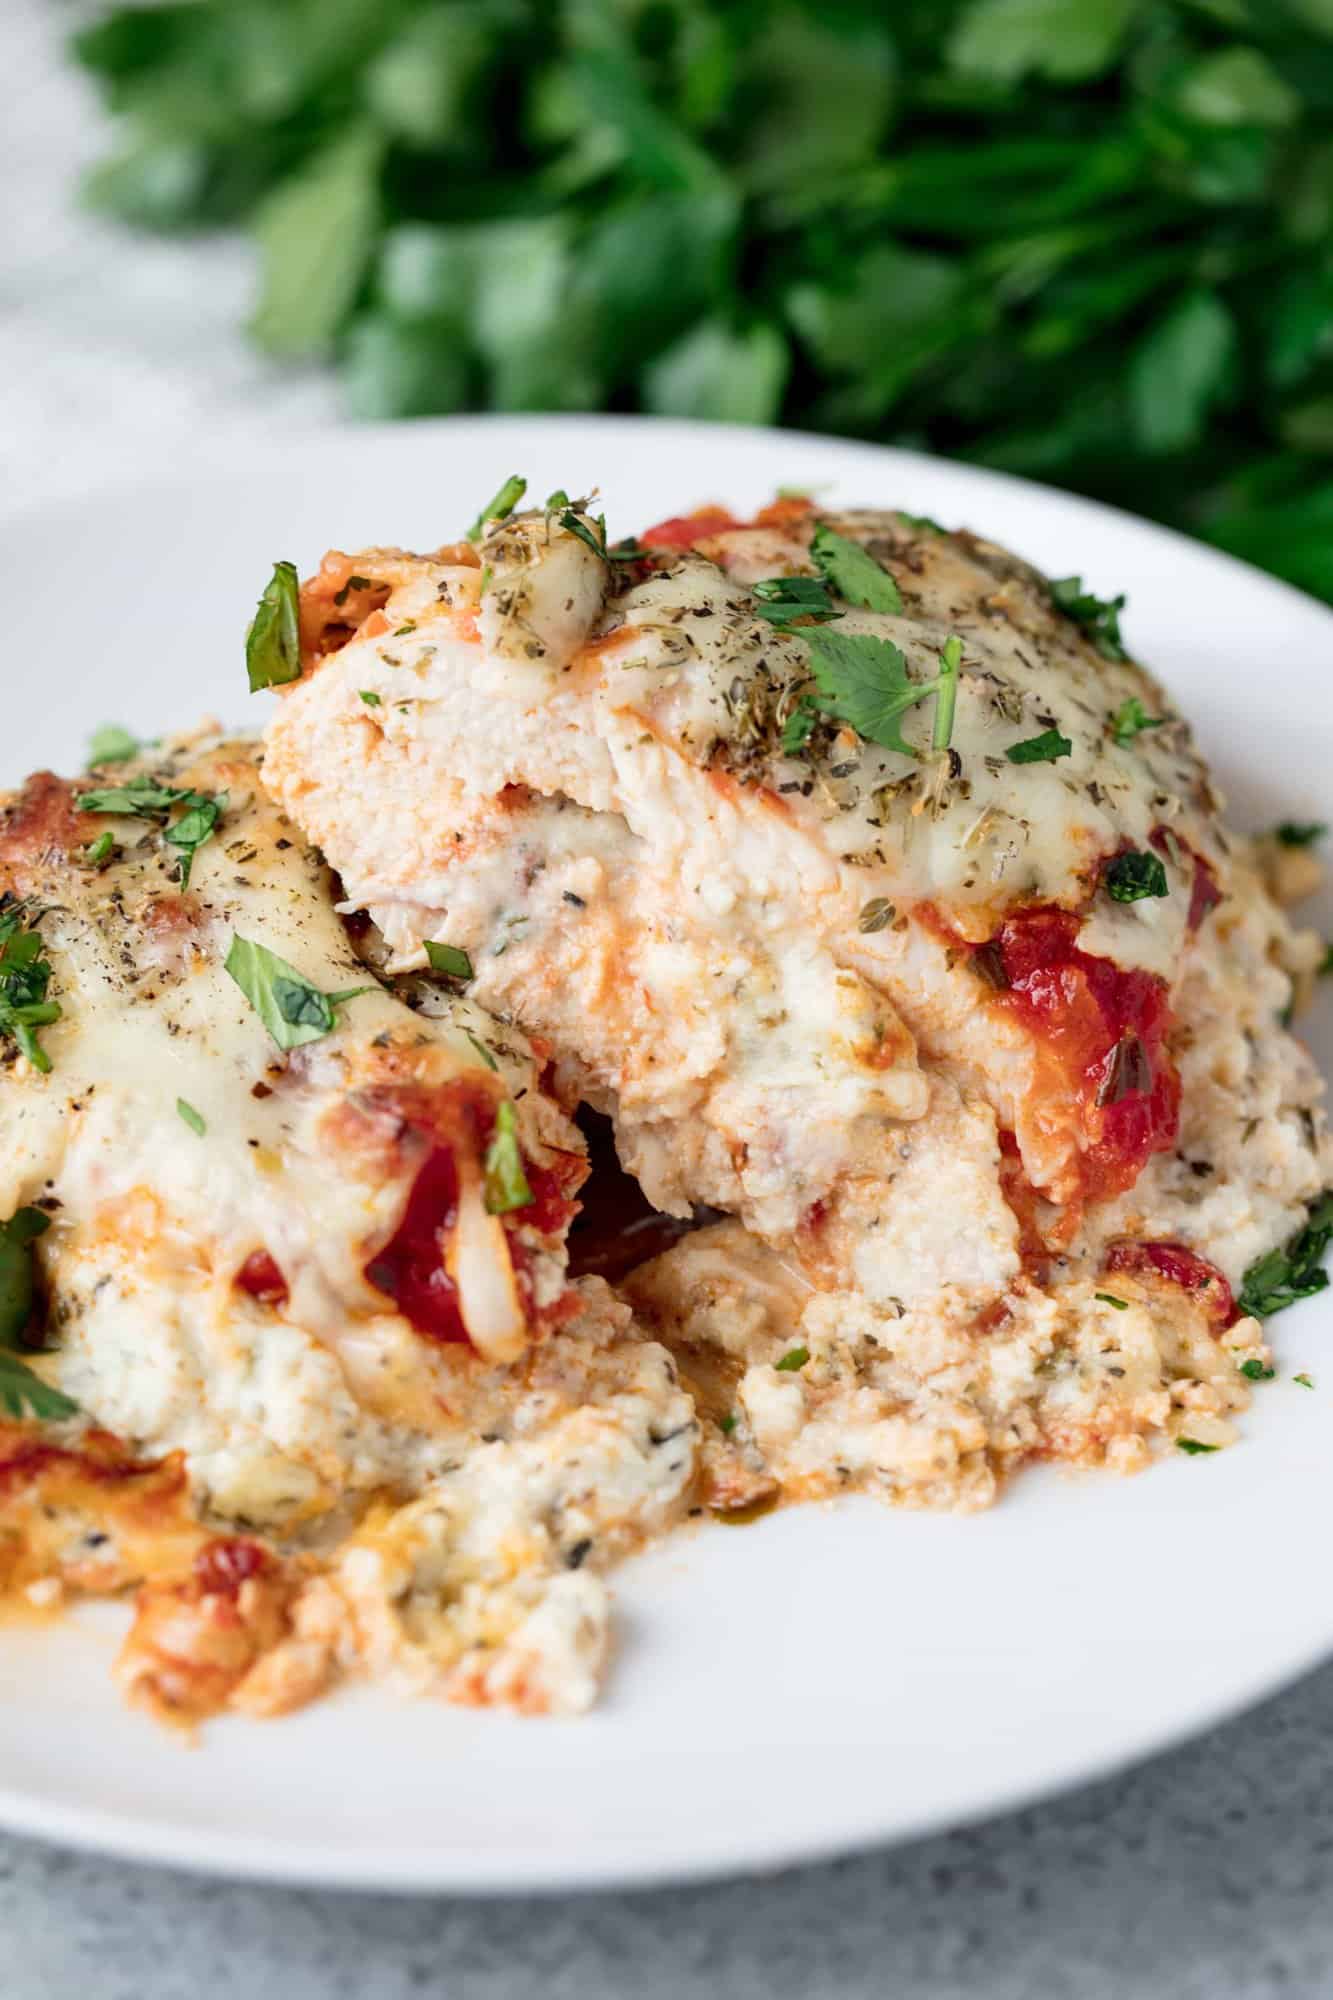 Lasagna Stuffed Chicken is all the flavors you love from lasagna stuffed inside a chicken breast and it's smothered in cheesy, saucy goodness. What's not to love?